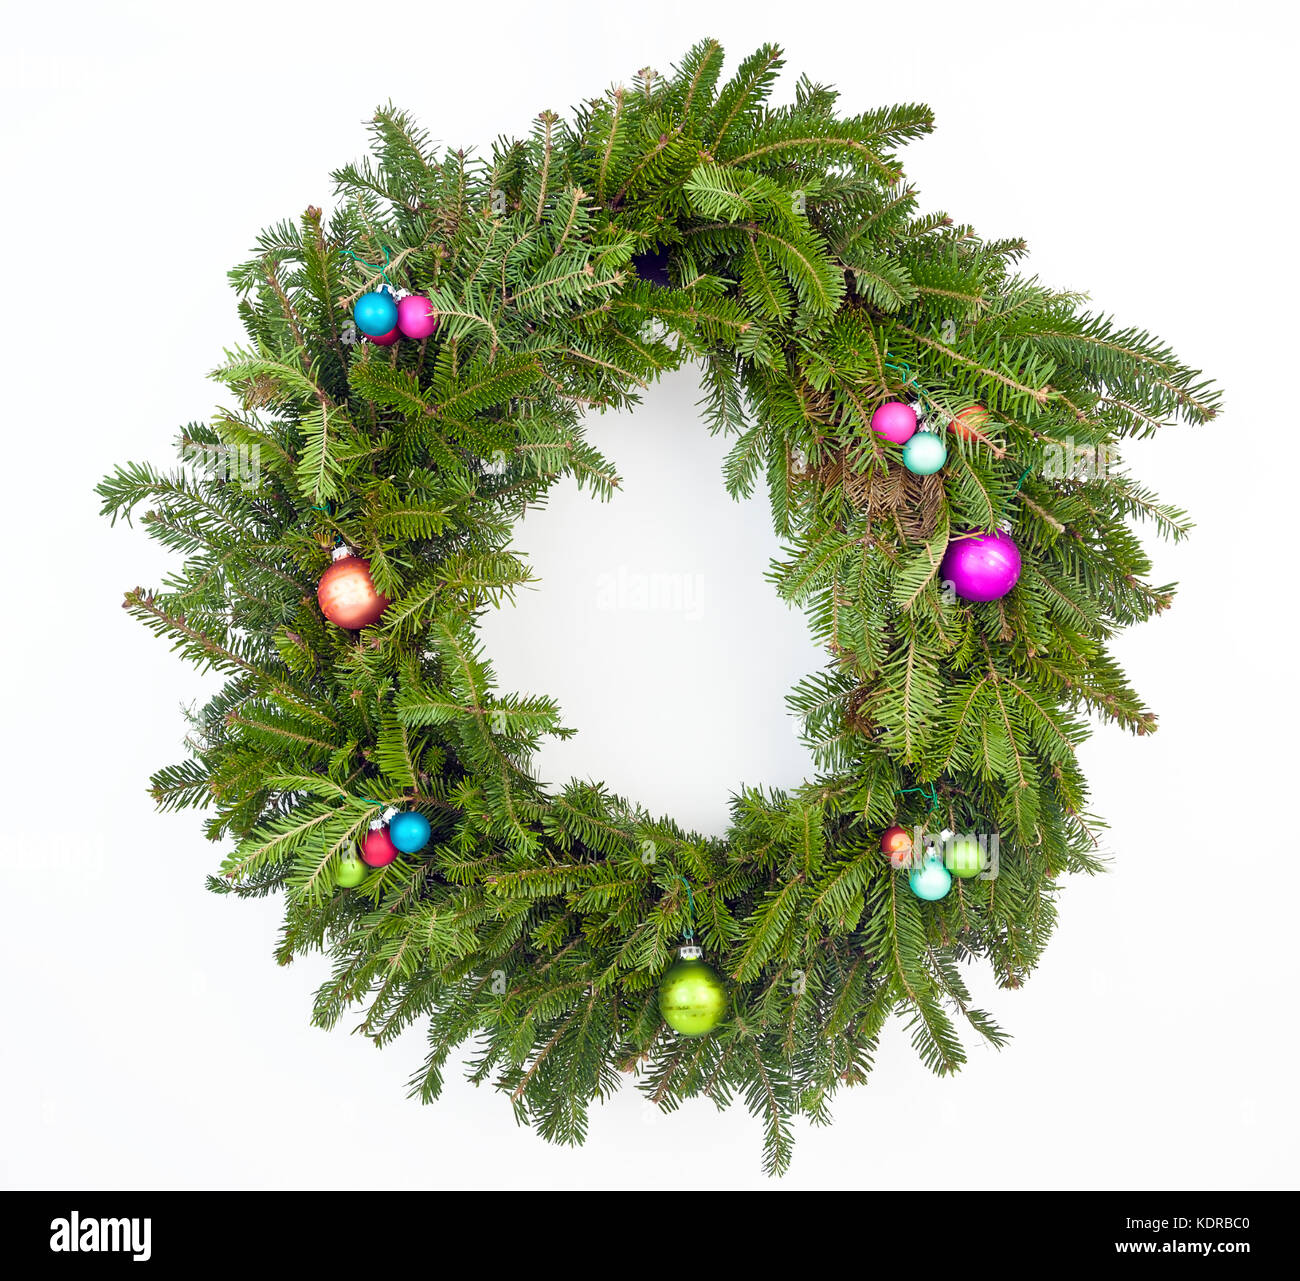 Simple Christmas wreath set with ornaments. Isolated. Stock Photo